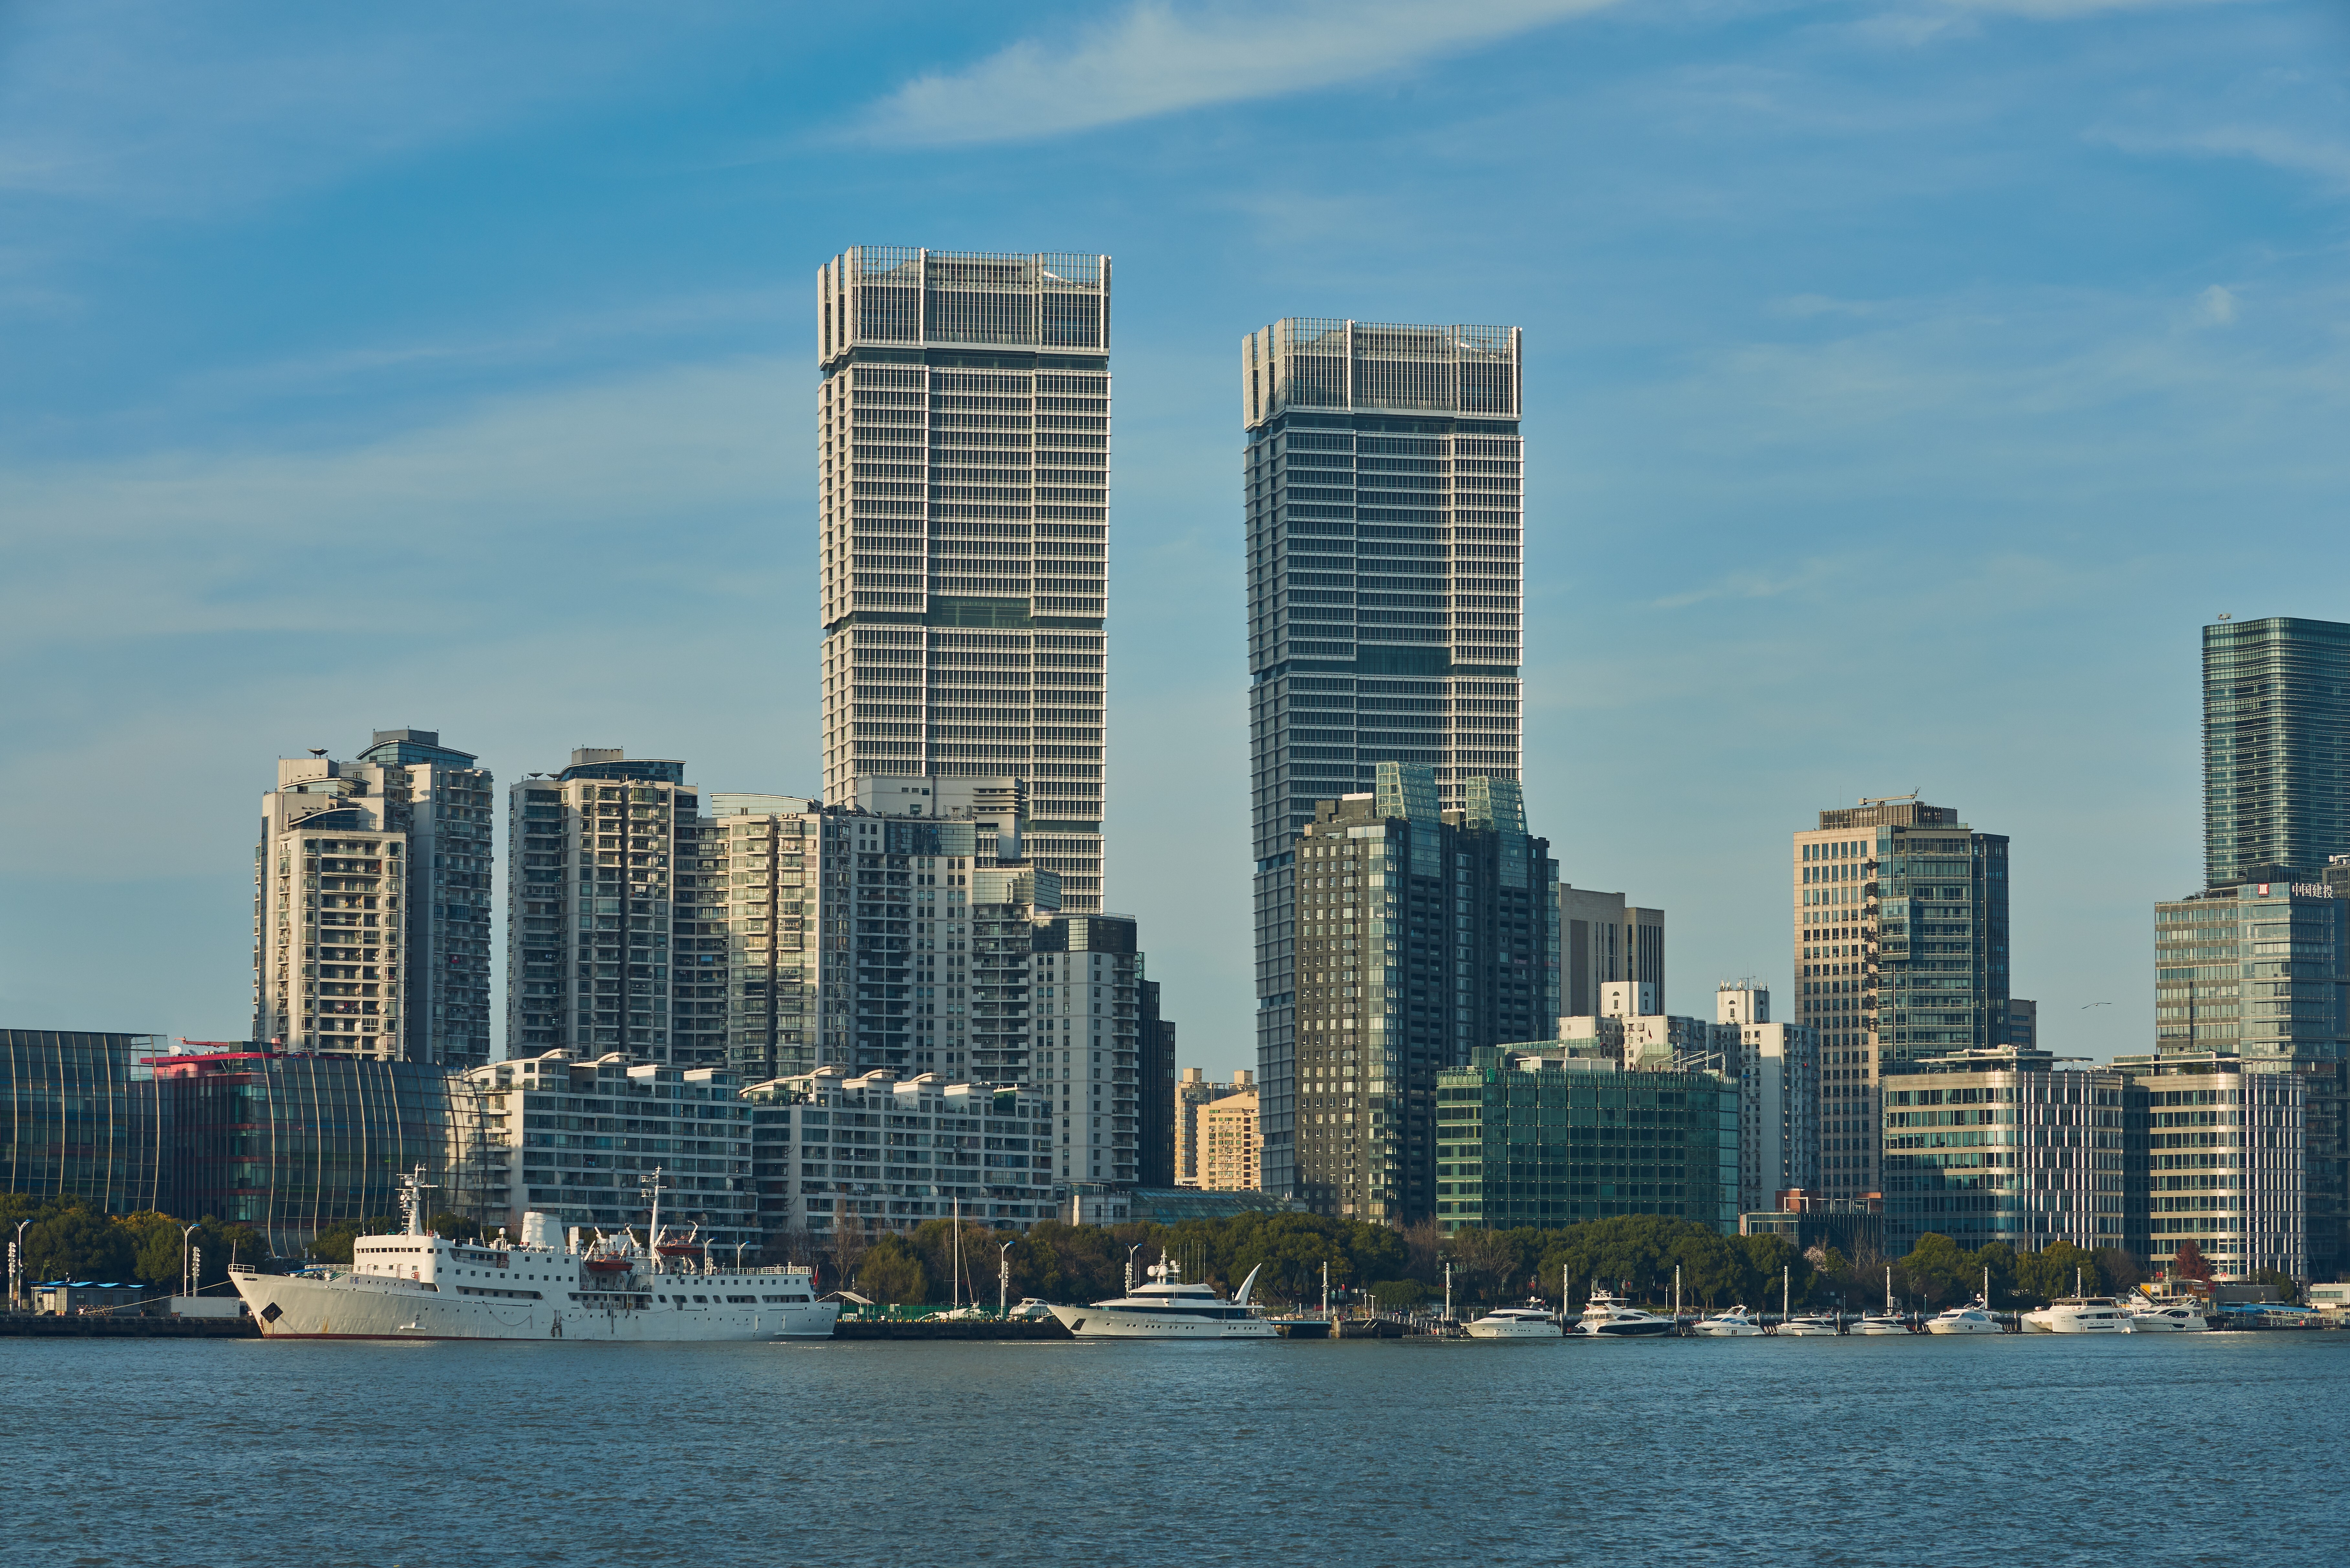 The North Bund project will be a milestone in the urban development of Shanghai, says Wu Xinbao, the Communist Party chief of Hongkou district, where the waterfront area is located. Photo: Shutterstock